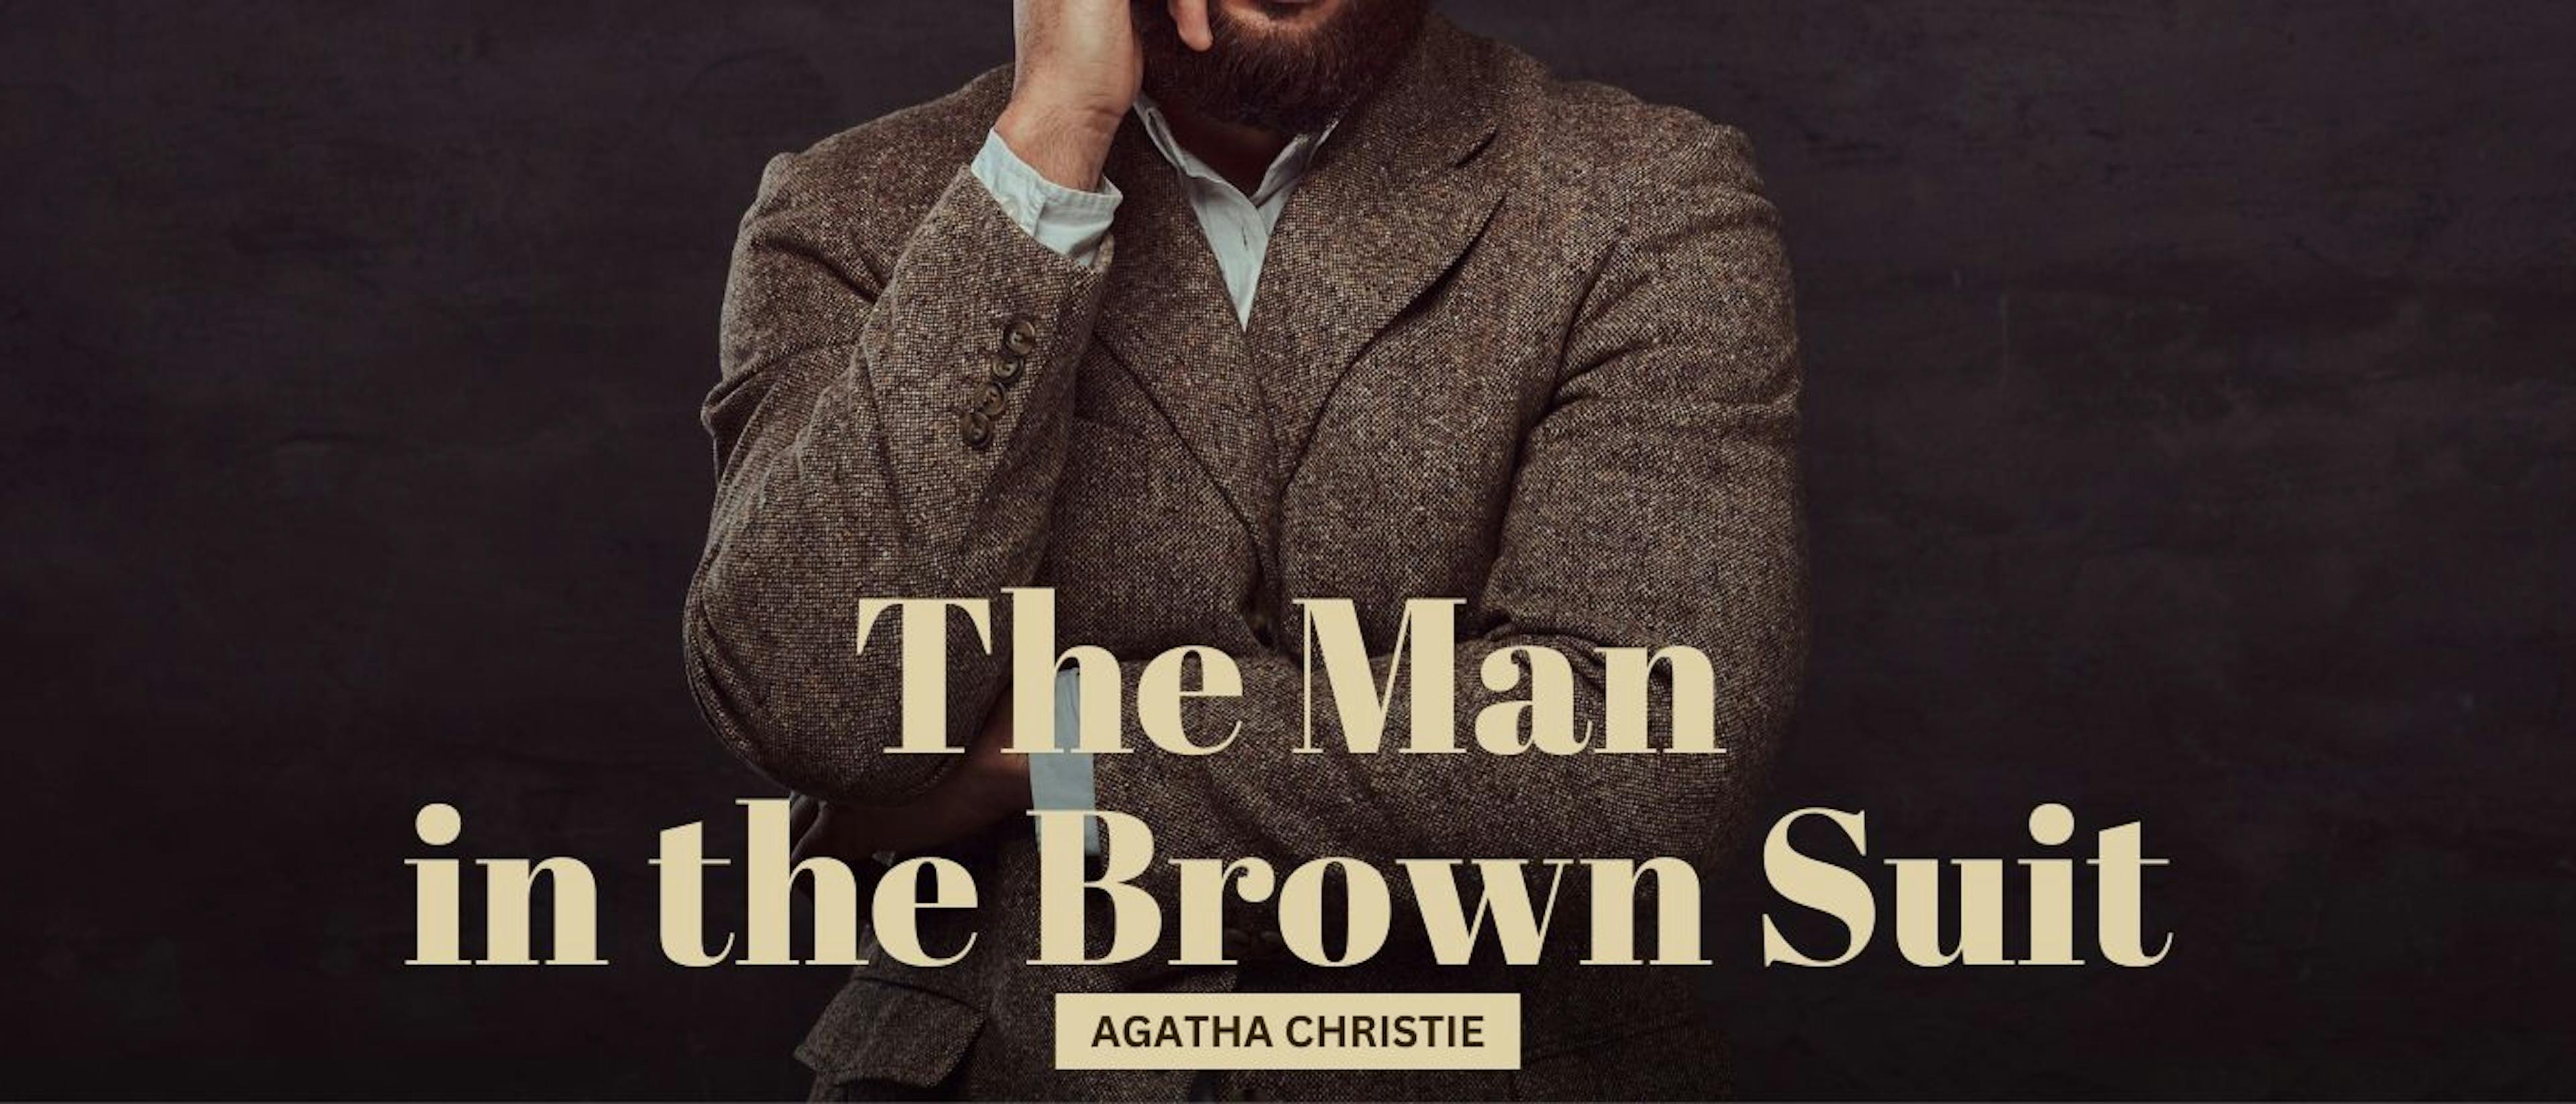 featured image - The Man in the Brown Suit by Agatha Christie - Table of Links